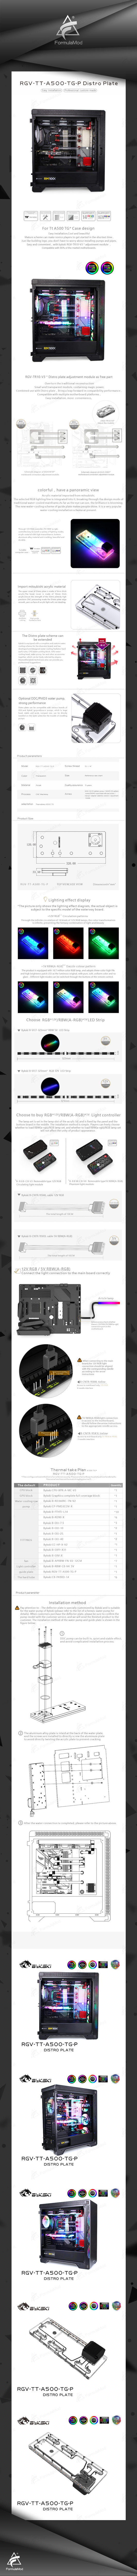 Bykski Distro Plate Kit For Thermaltake A500 TG Case, 5V A-RGB Complete Loop For Single GPU PC Building, Water Cooling Waterway Board, RGV-TT-A500-TG-P  